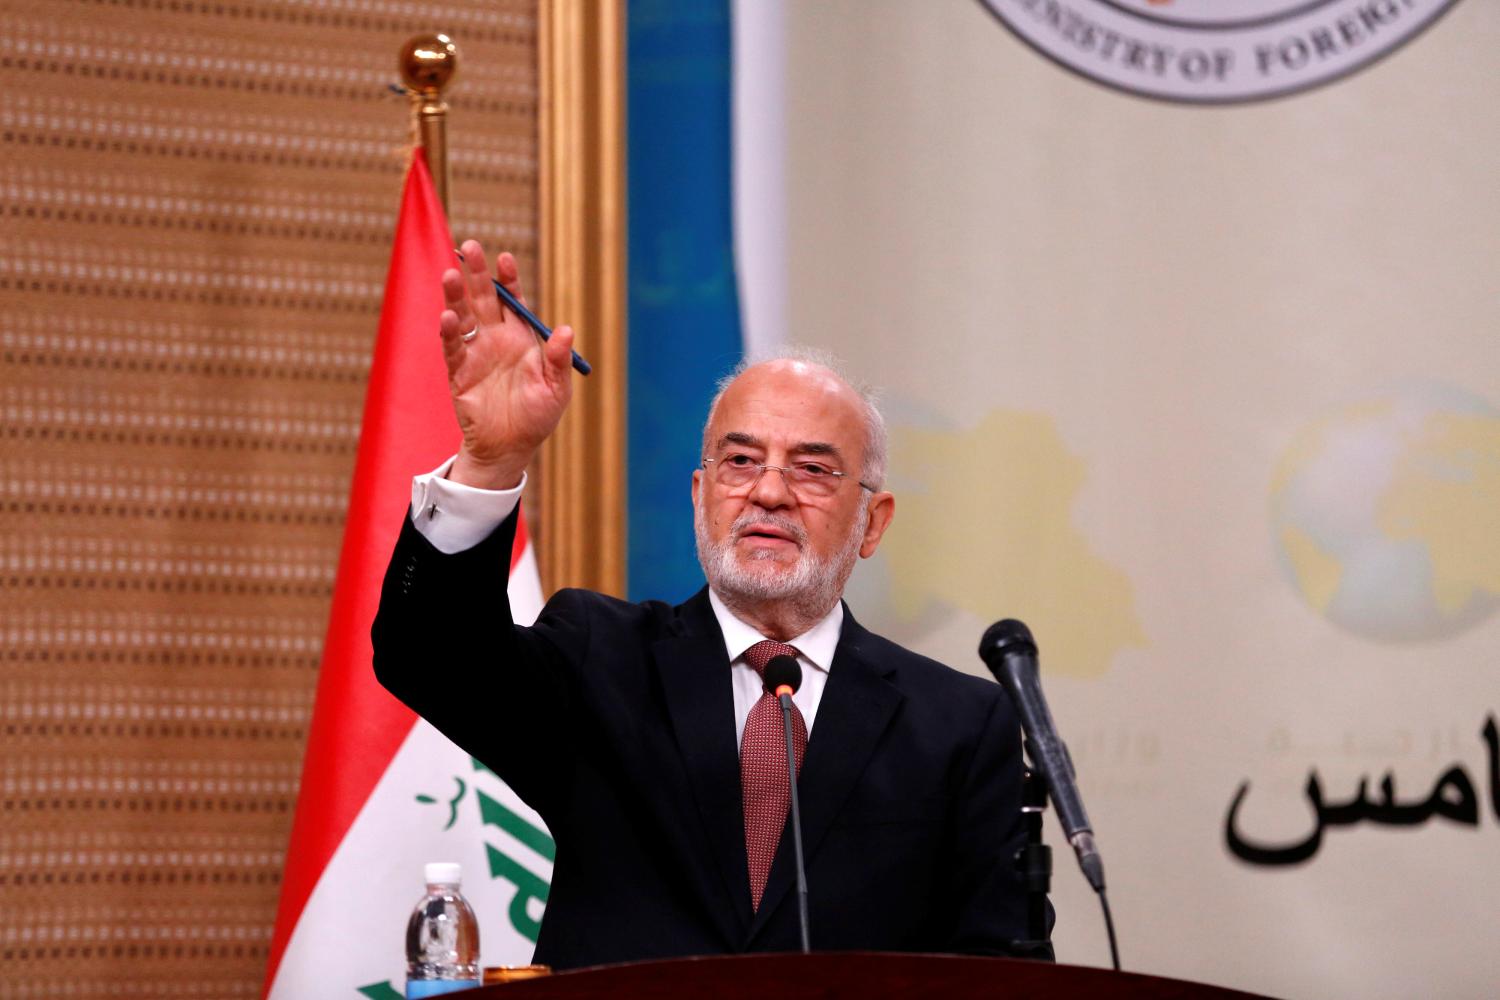 raqi Foreign Minister Ibrahim al-Jaafari speaks during a news conference in Baghdad